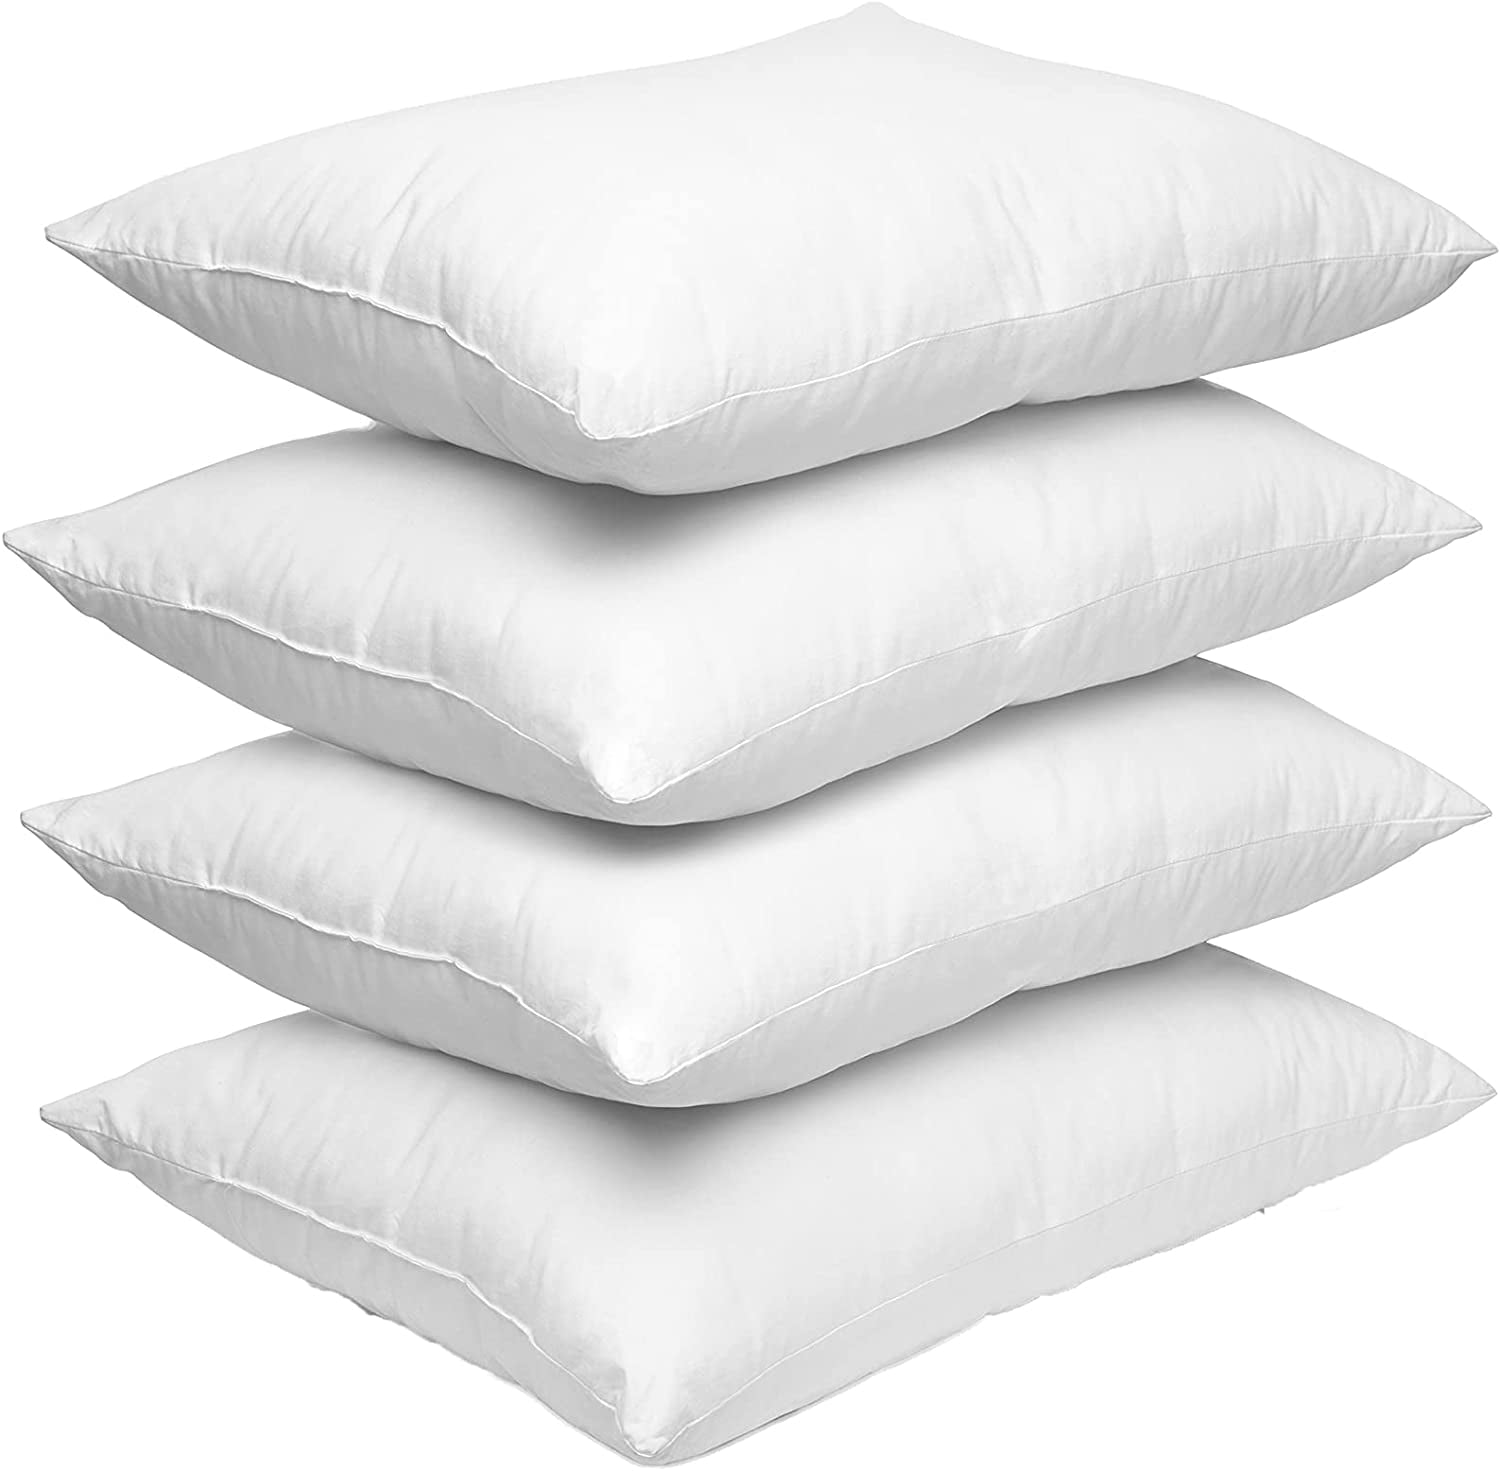  ACCENTHOME 18x18 Pillow Inserts (Pack of 4